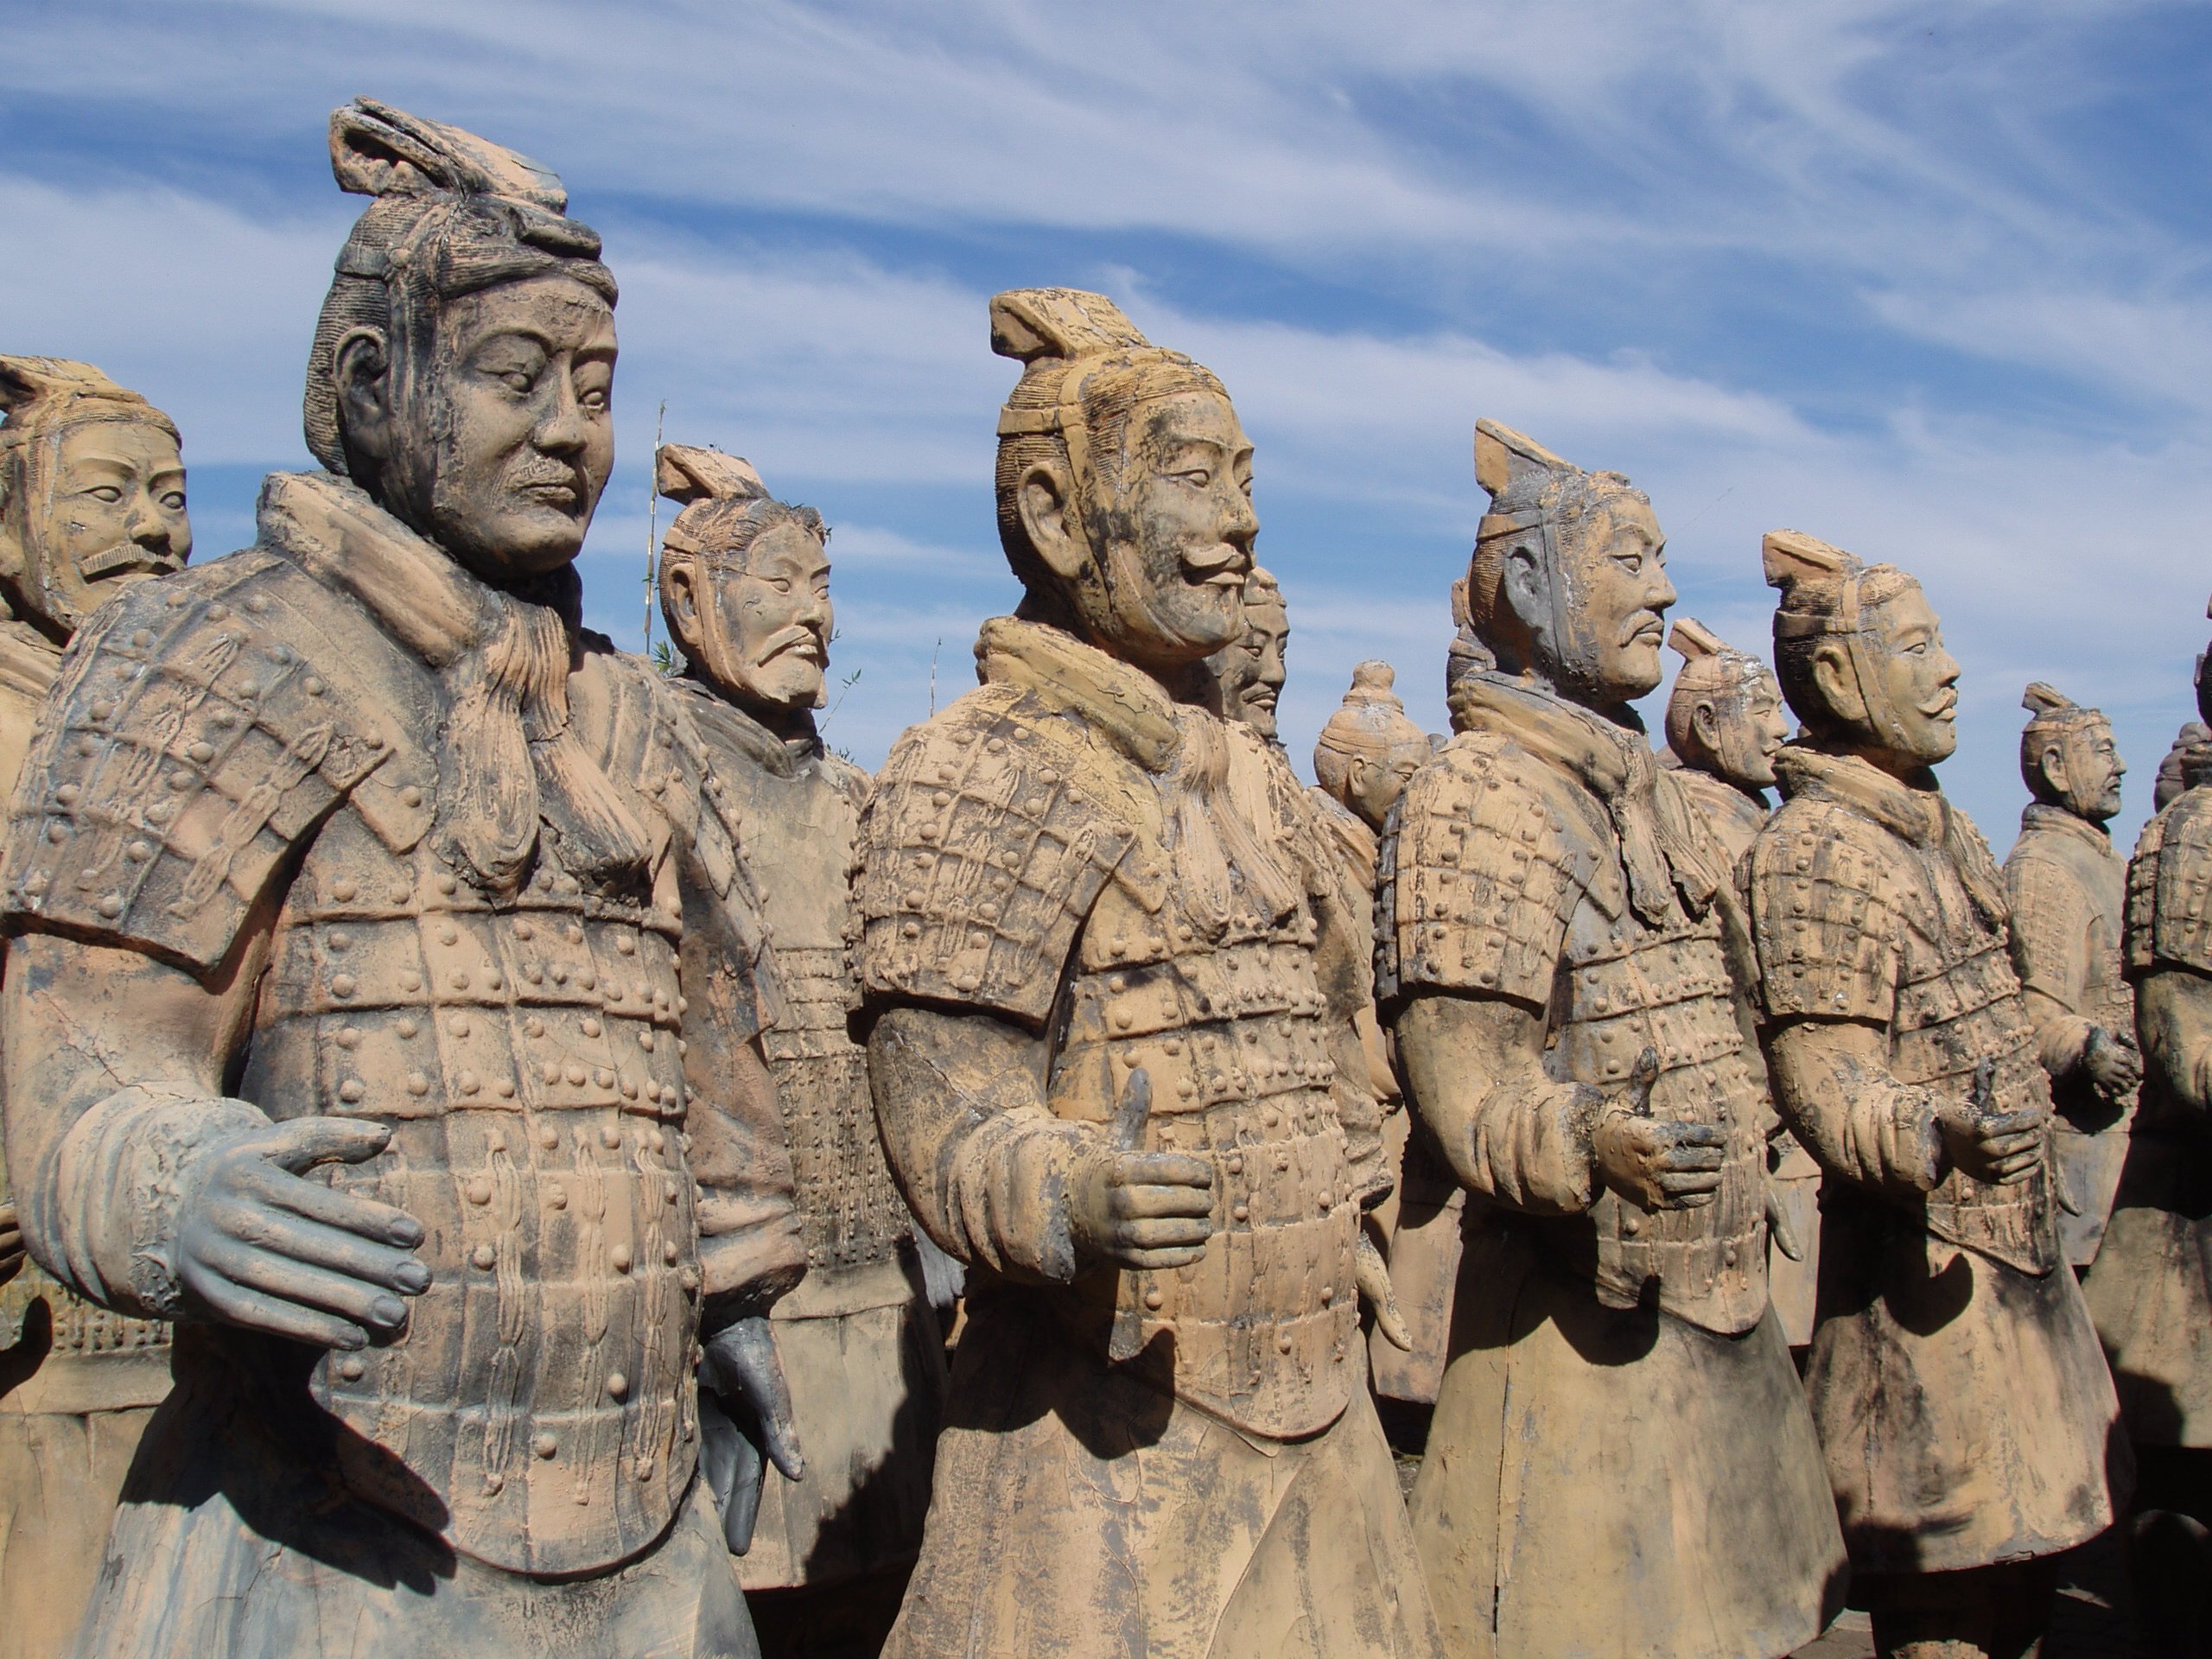 China Terra Cotta Army Warriors Google image from http://fwallpapers.com/files/images/terracotta-army-warriors-china-2.jpg